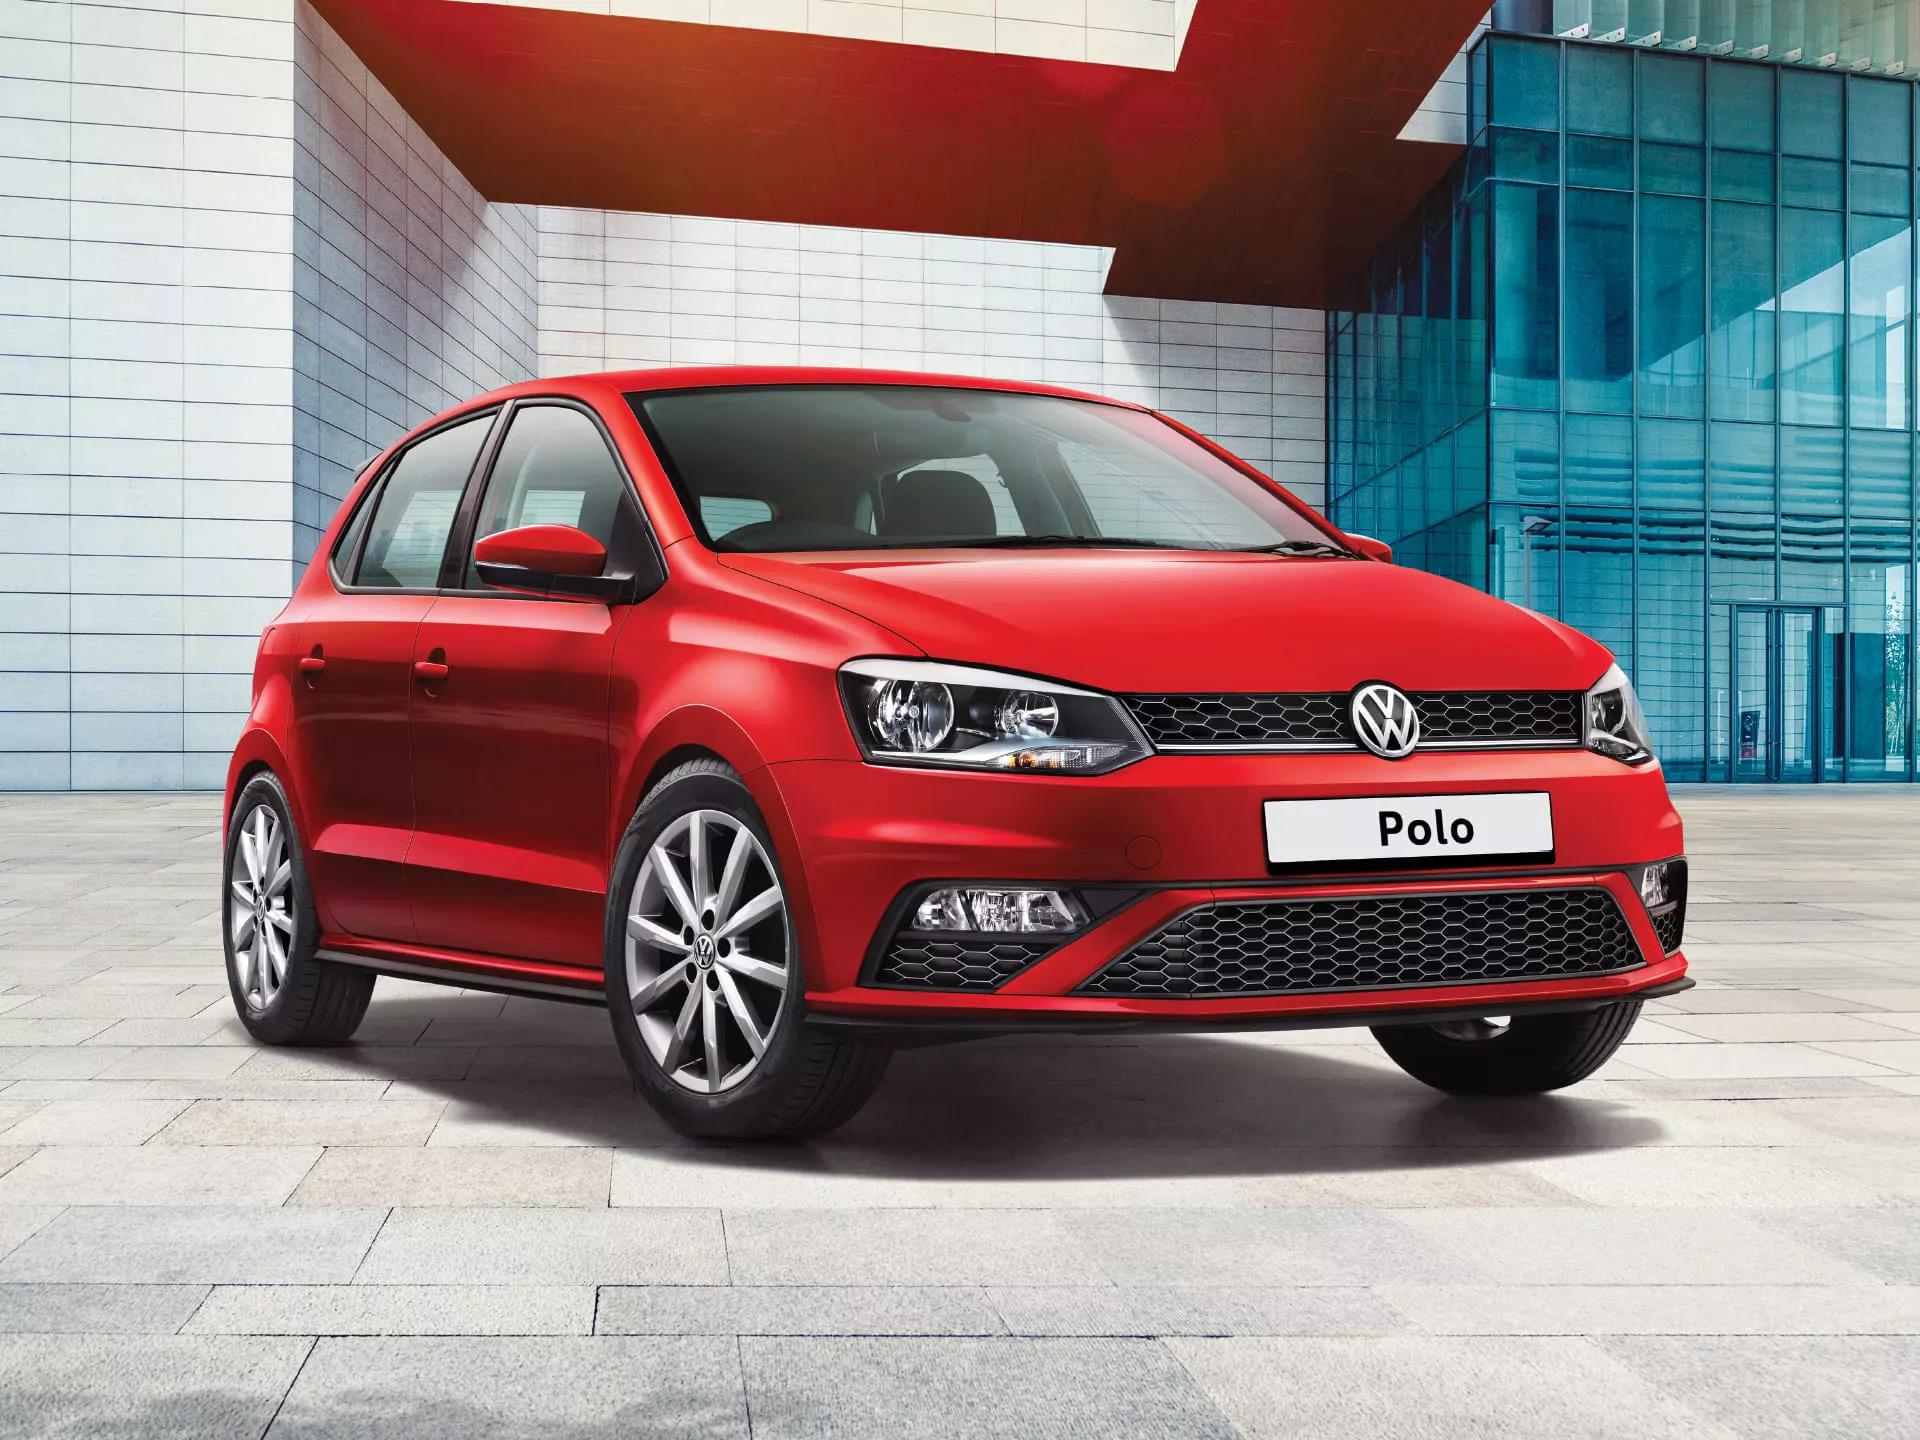 Volkswagen Polo Highline Plus Automatic Specs & Price in India